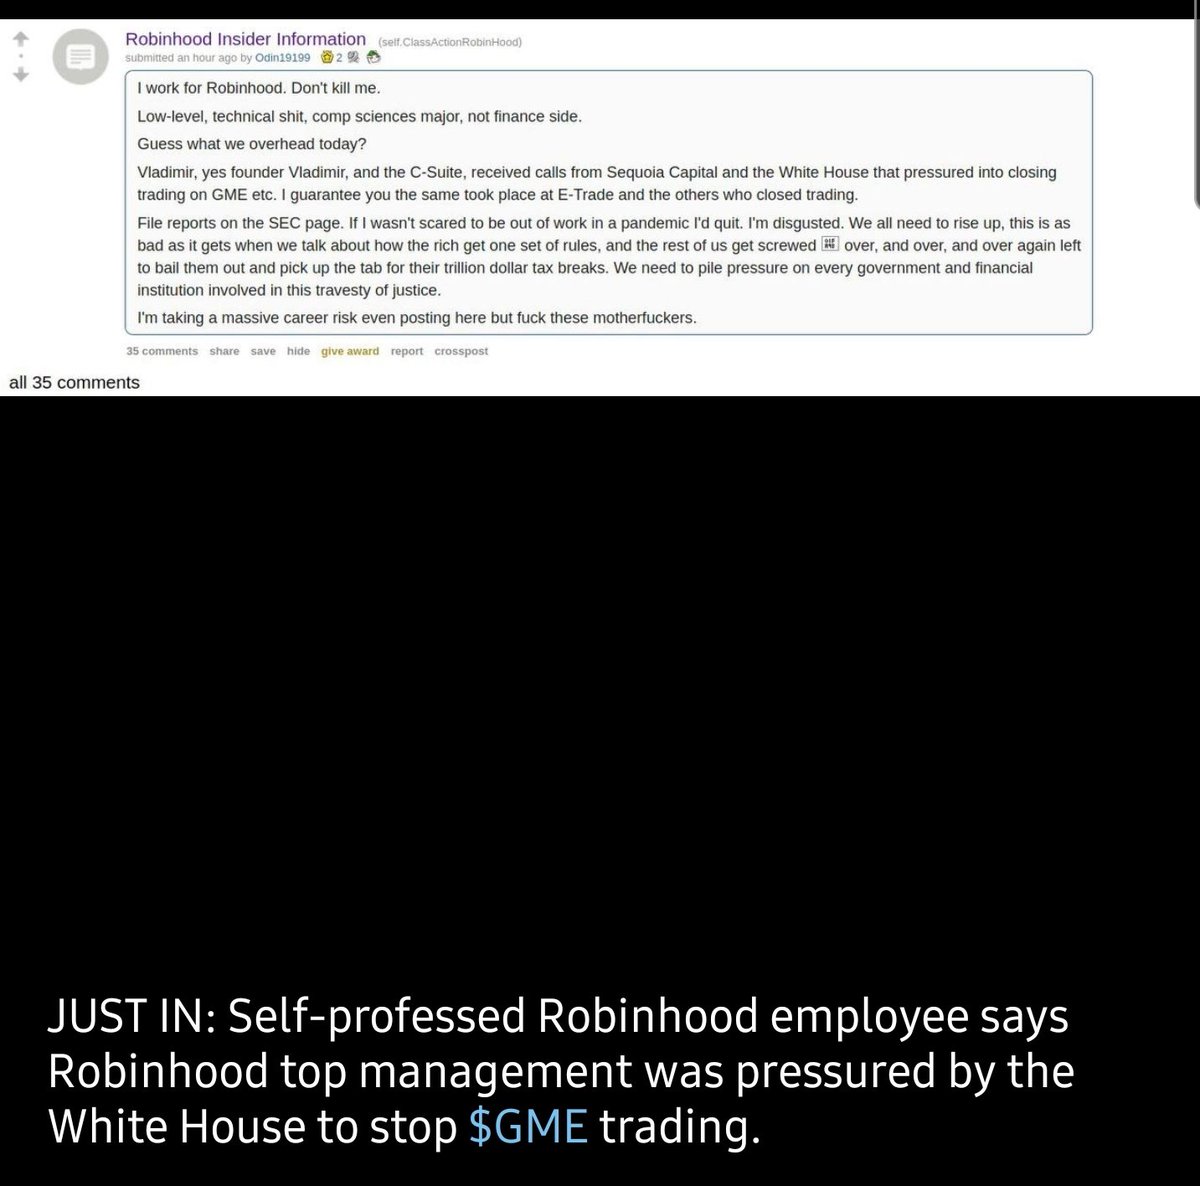 This Reddit post from a "Robinhood insider" claims that the White House is responsible for shutting down  $GME. This has all the things QAnon loves 1) anonymous insider, 2) blames Biden, and 3) secret plots to controll the population.